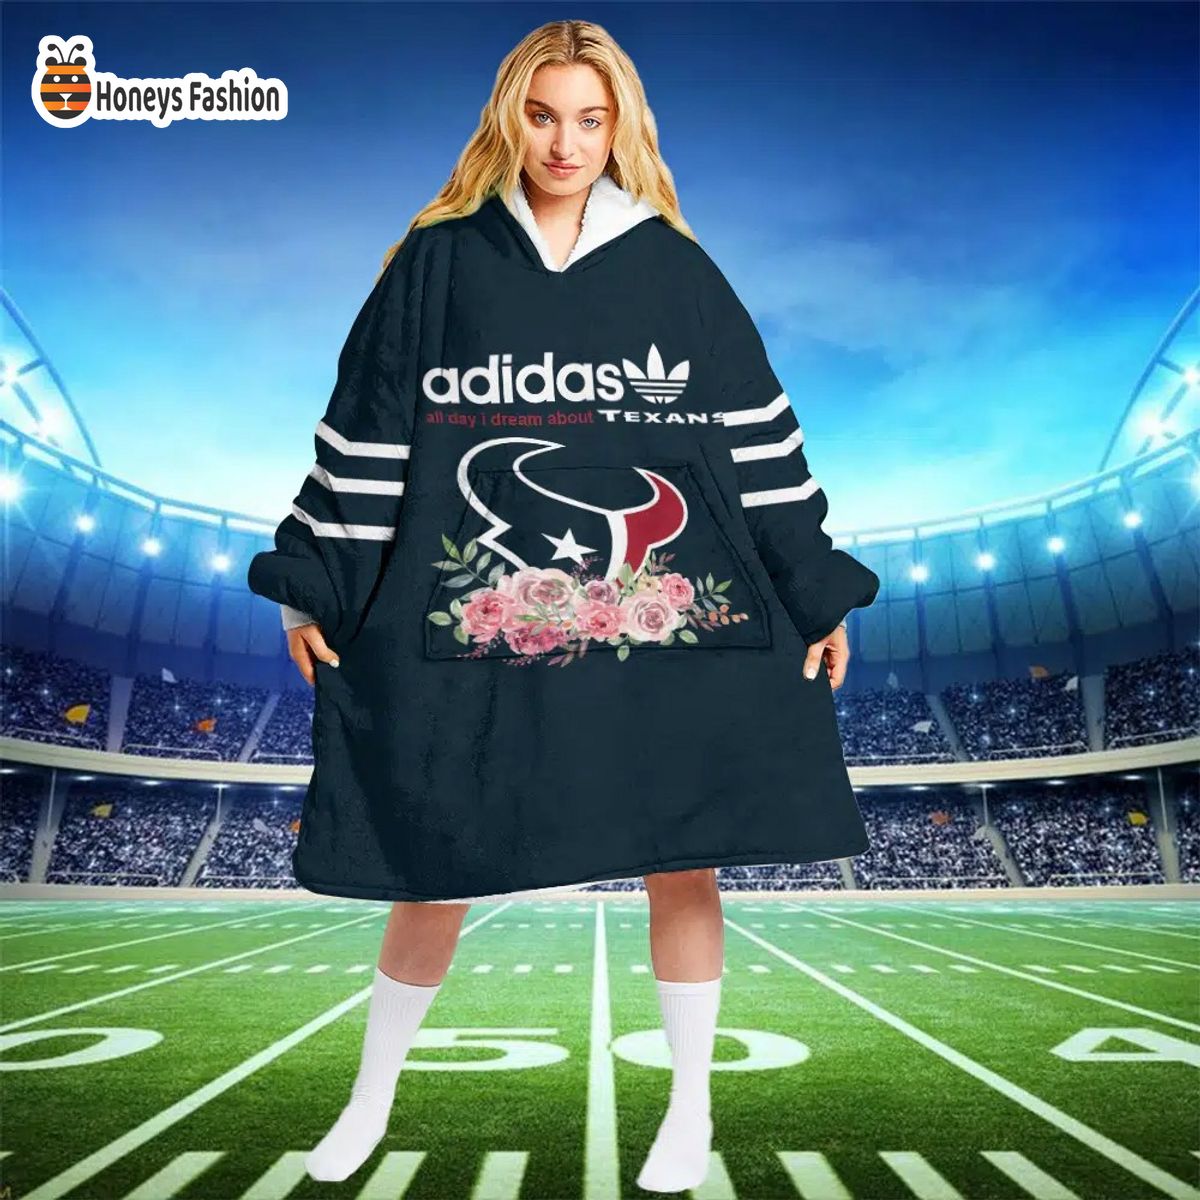 Houston Texans NFL Adidas all day i dream about Texans blanket hoodie